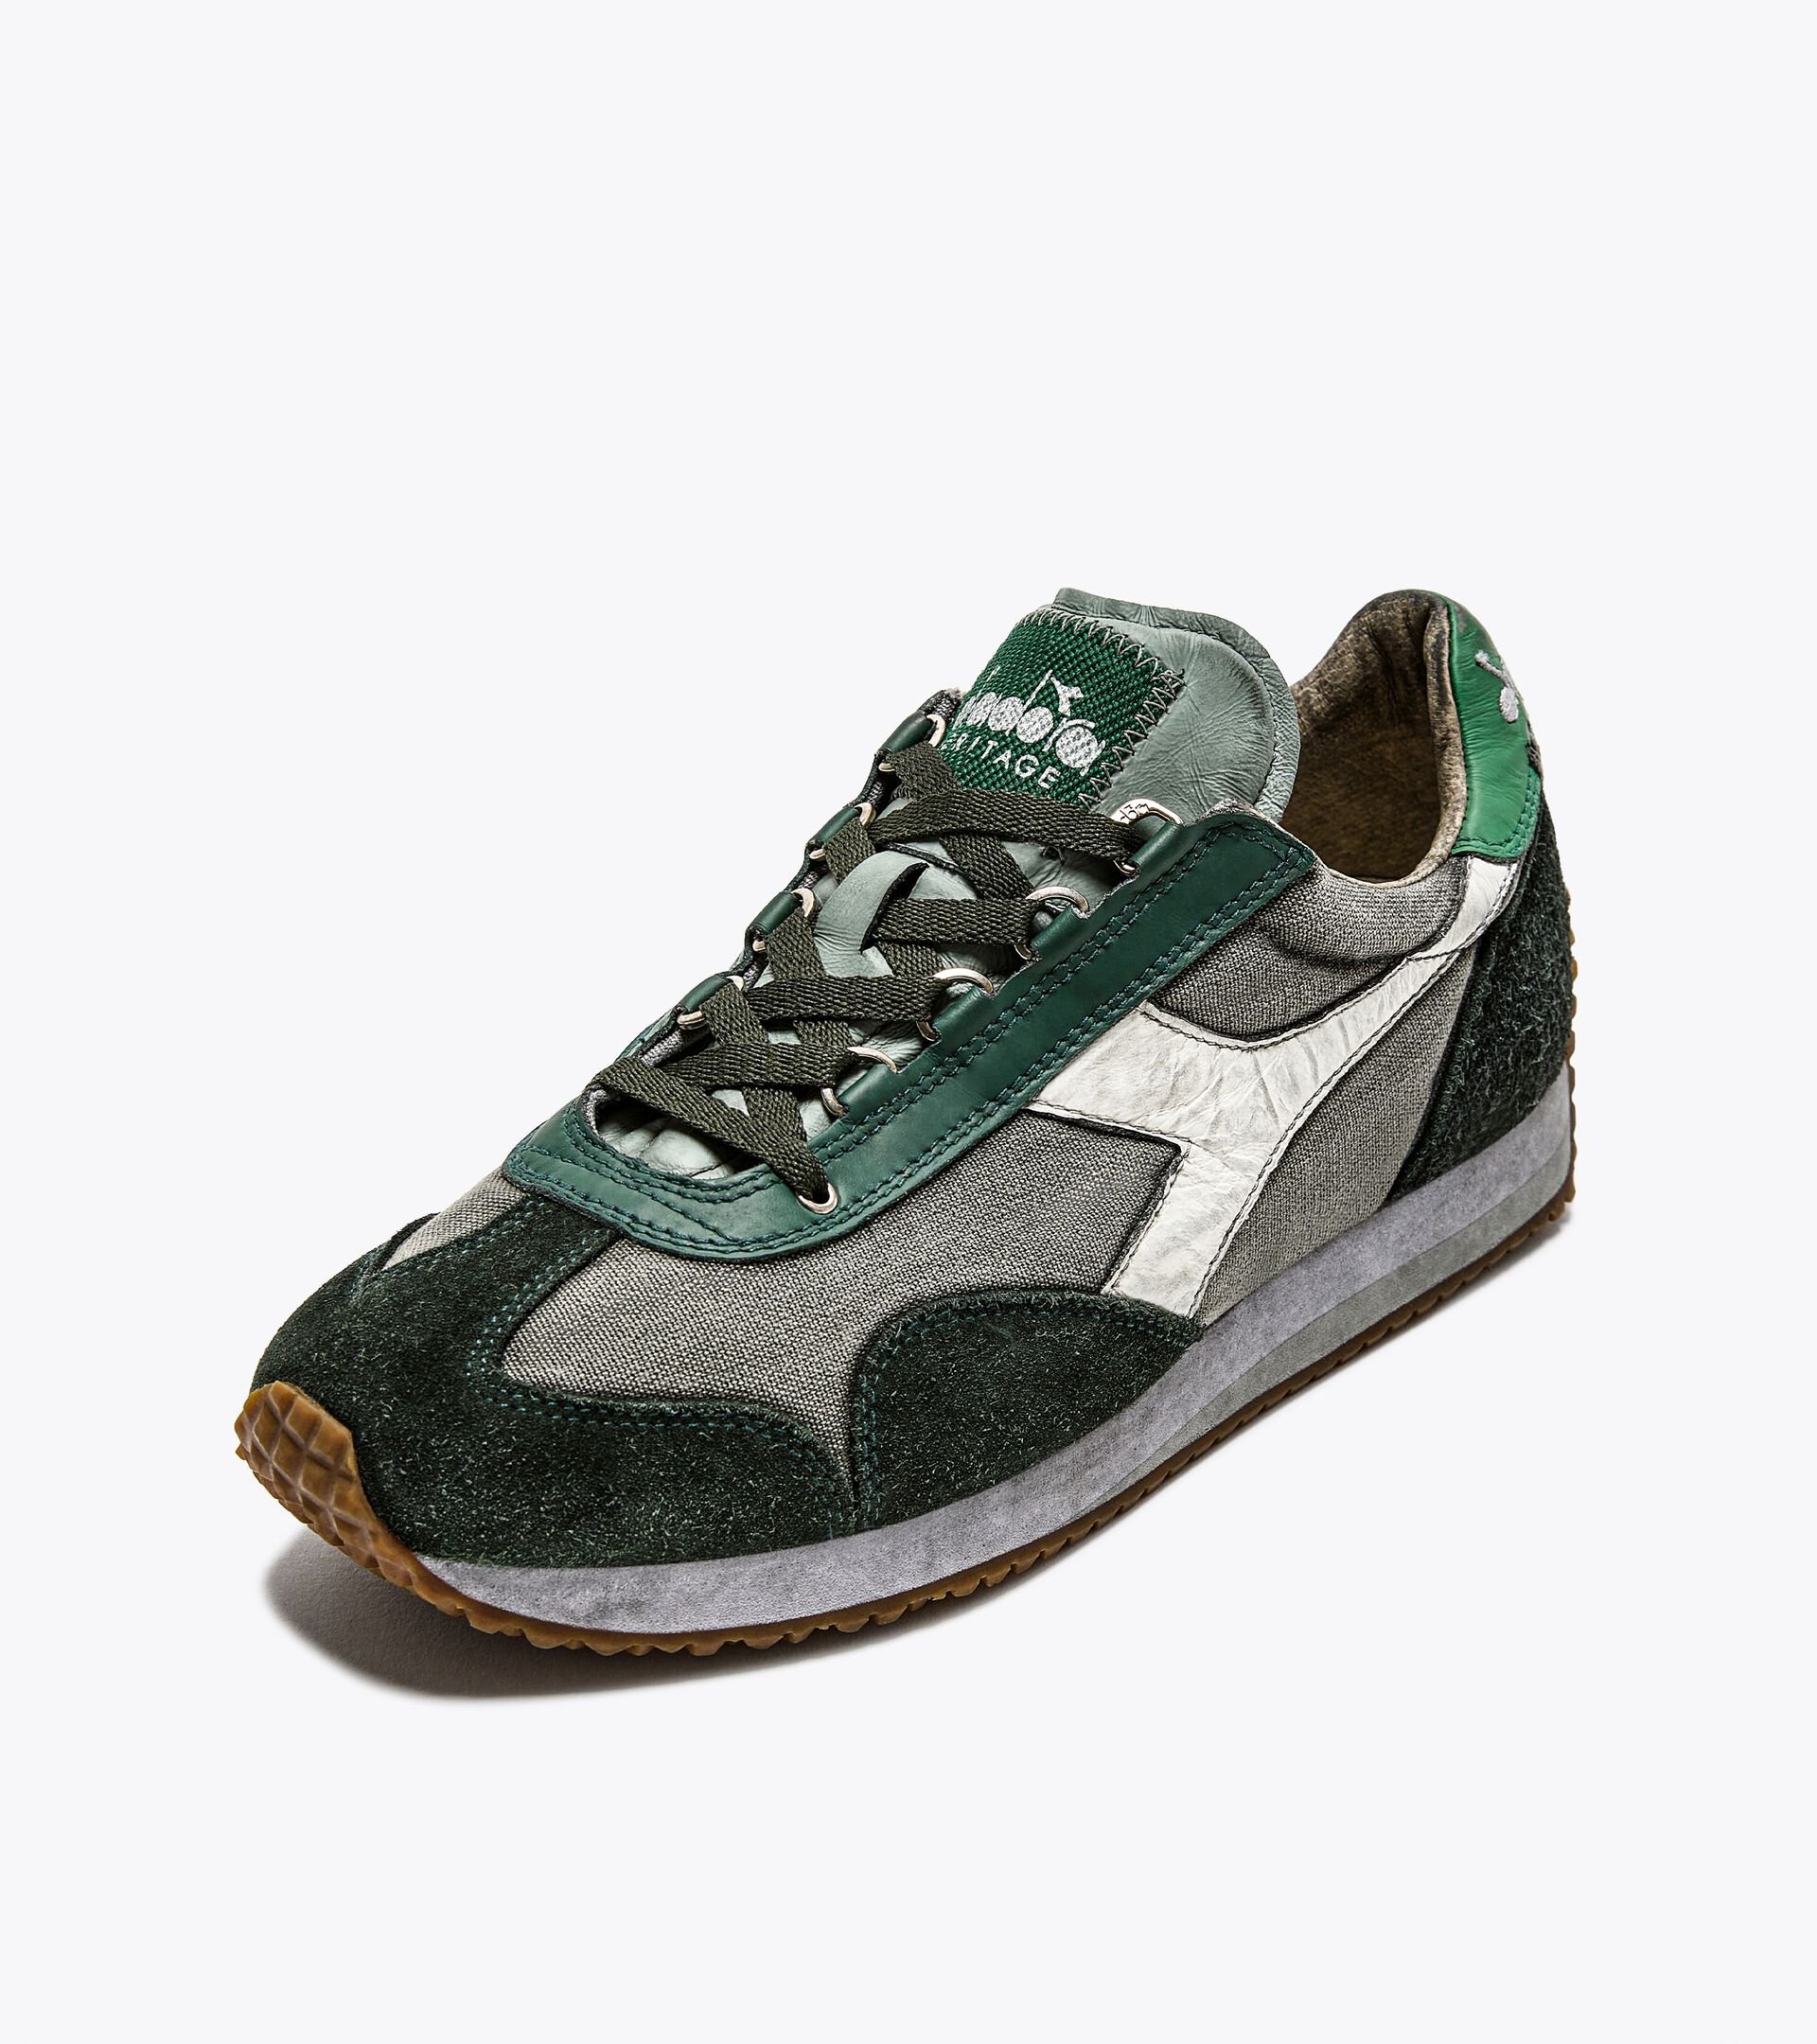 Chaussures Heritage - Gender neutral EQUIPE H DIRTY STONE WASH EVO SLATE GRAY - Diadora